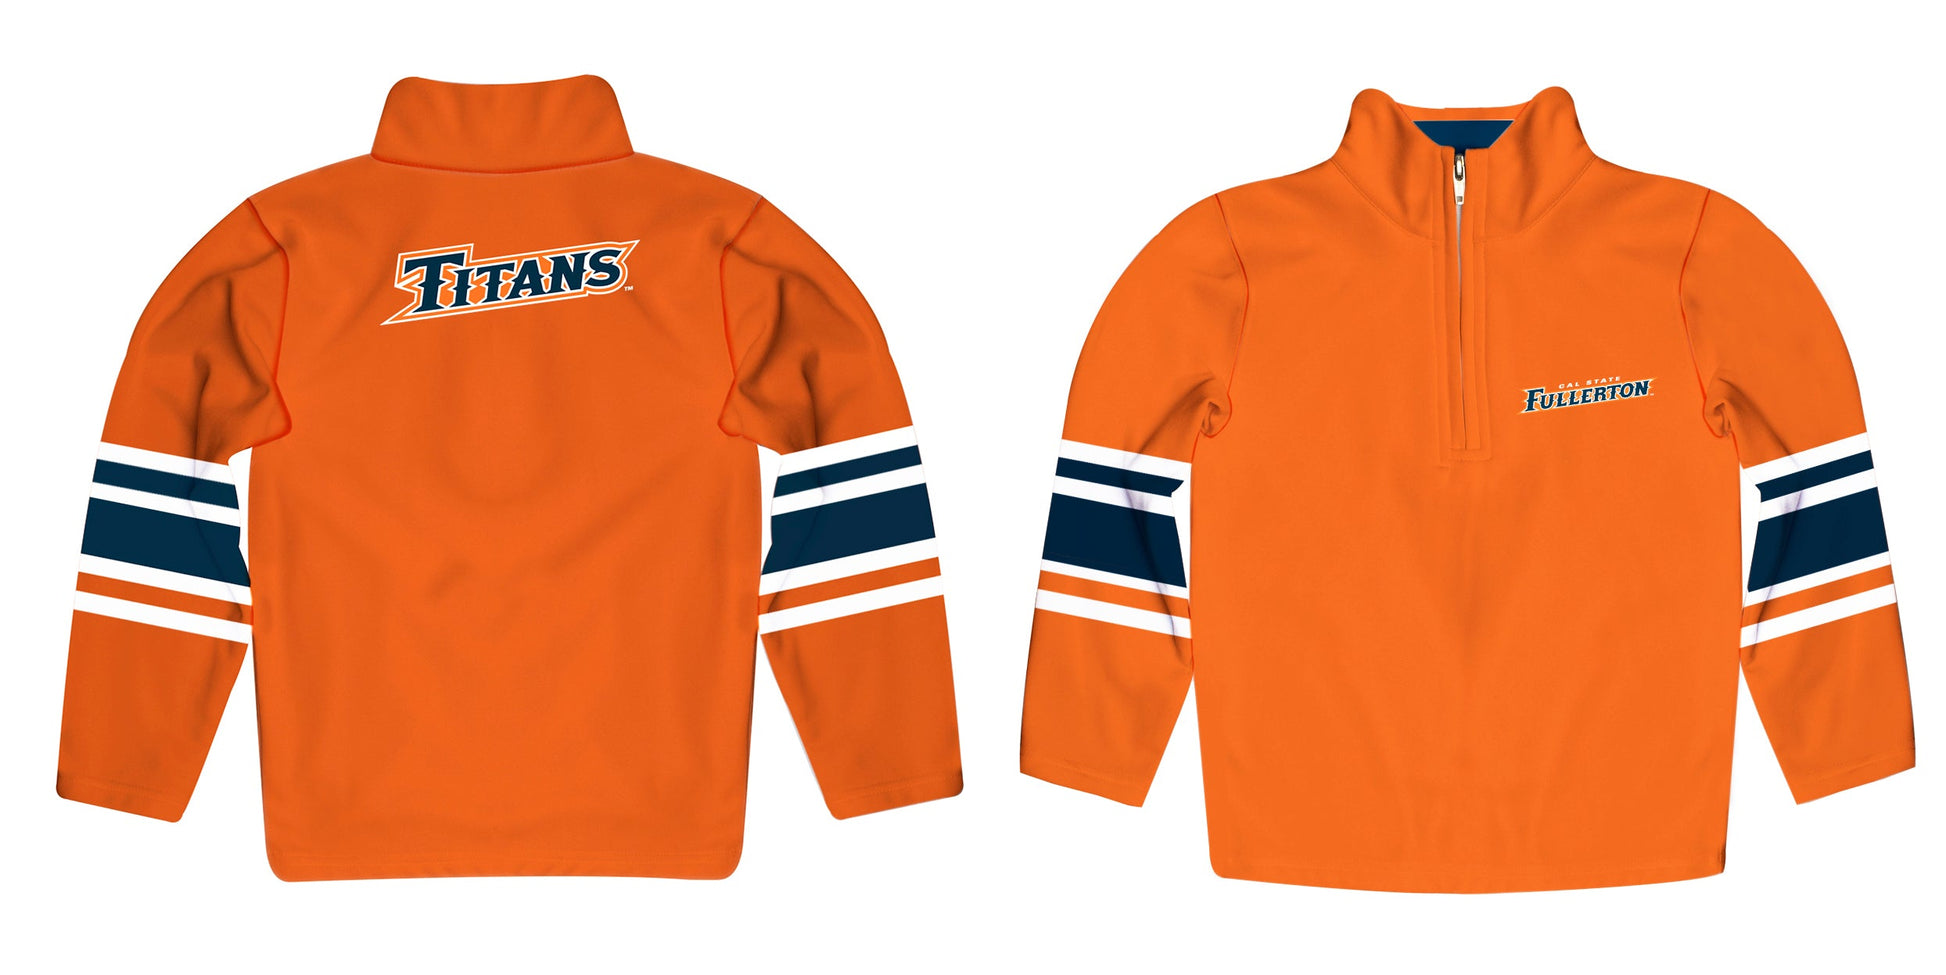 Cal State Fullerton Titans CSUF Game Day Orange Quarter Zip Pullover for Infants Toddlers by Vive La Fete